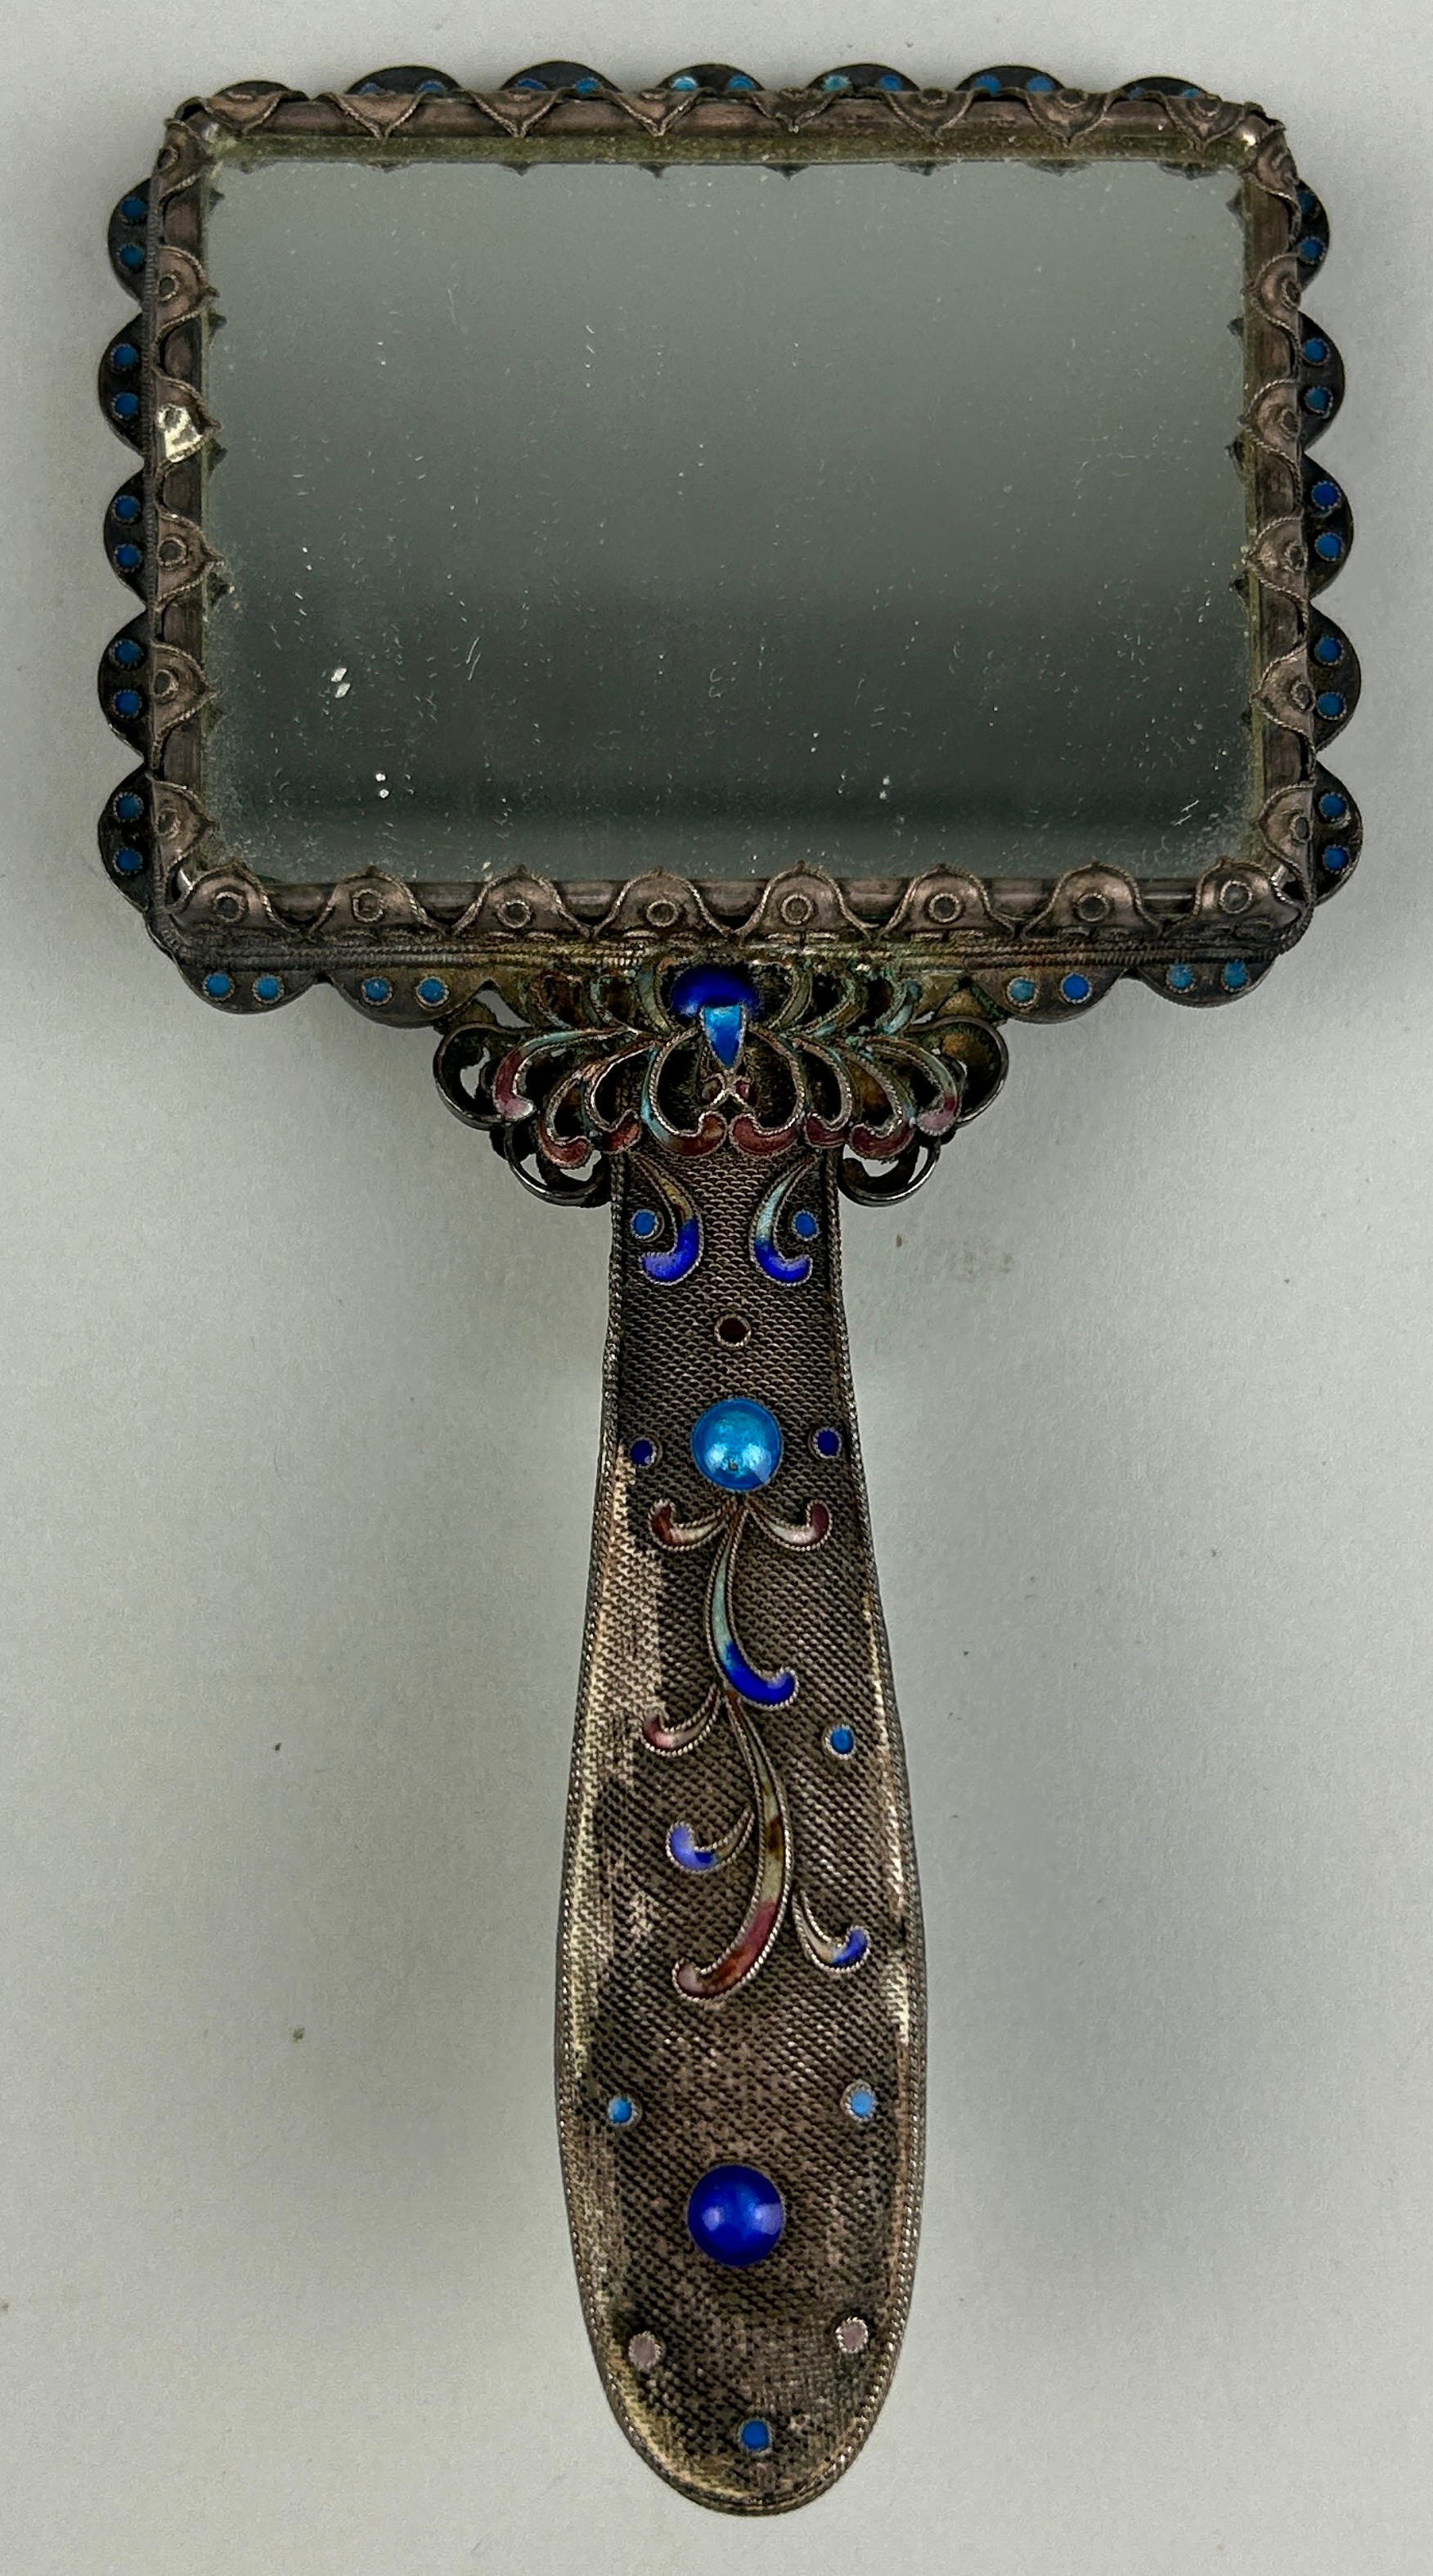 AN 18TH CENTURY CHINESE 'TWIN FISH' JADE PLAQUE SET IN AN ENAMELLED SILVER MIRROR WITH JADE HANDLE - Image 3 of 6